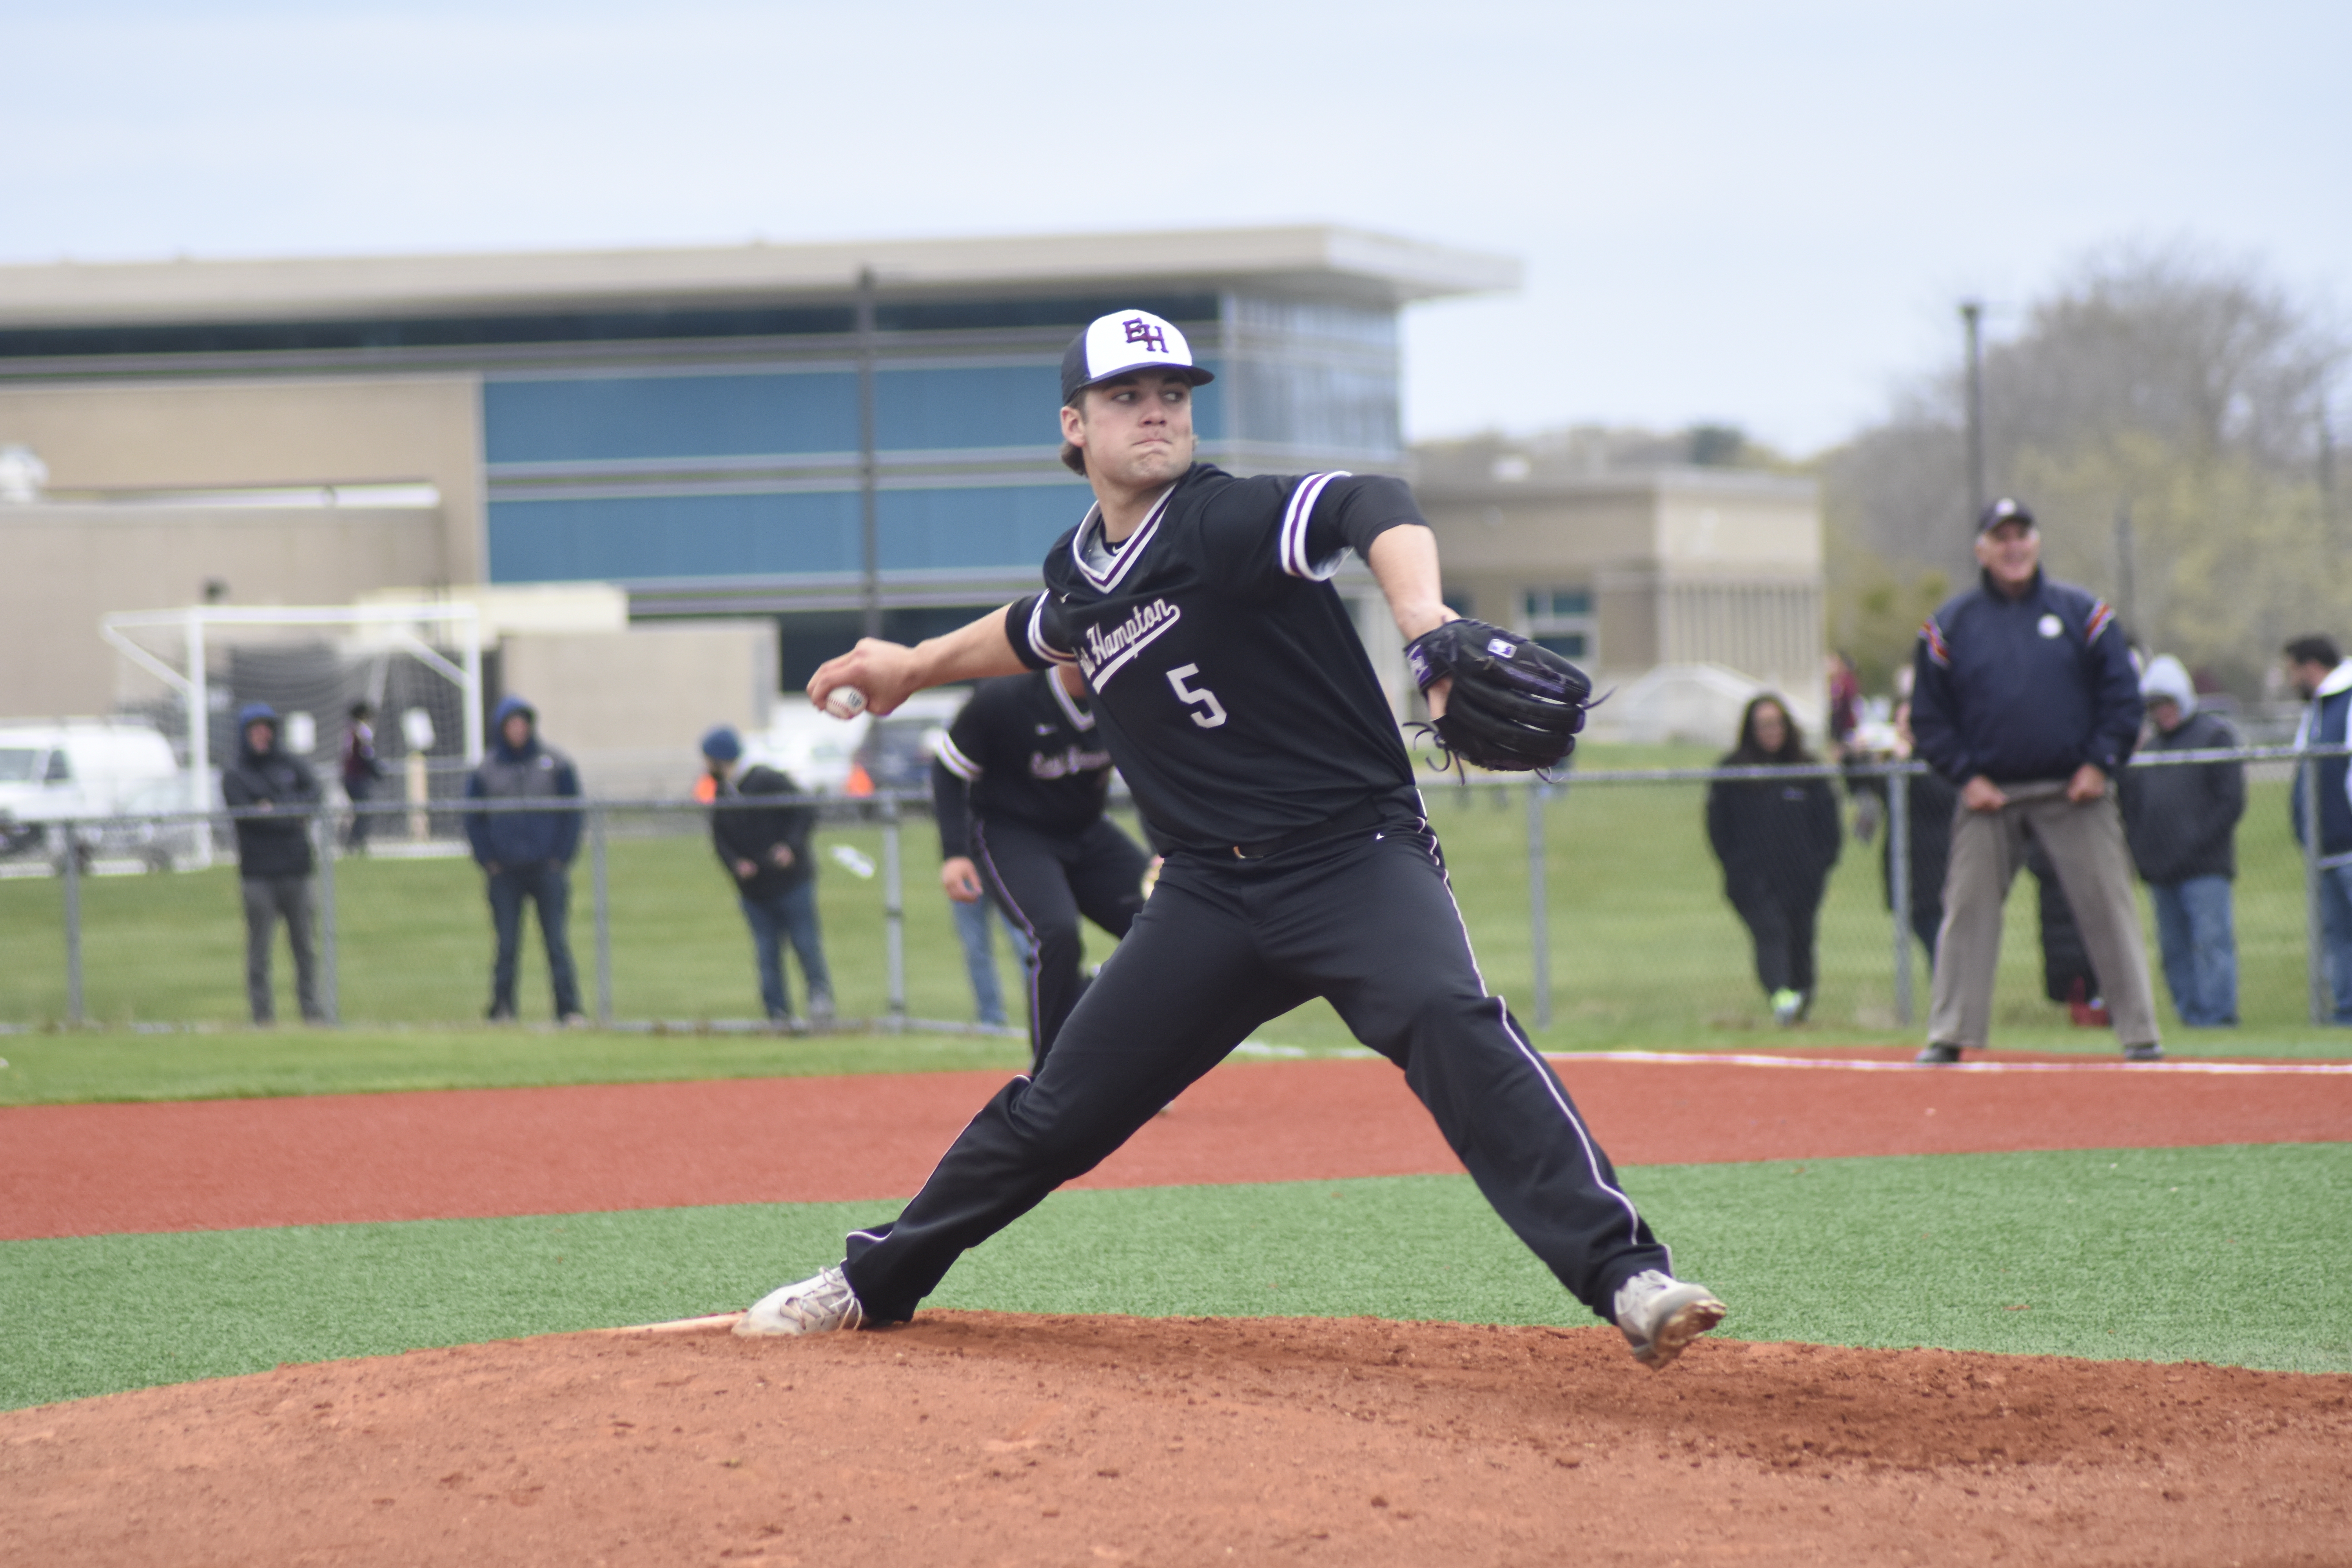 Senior starting pitcher Jack Dickinson pitched in and out of trouble on Friday, ultimately getting the victory after the Bonackers' late rally resulted in a 9-1 win.    DREW BUDD